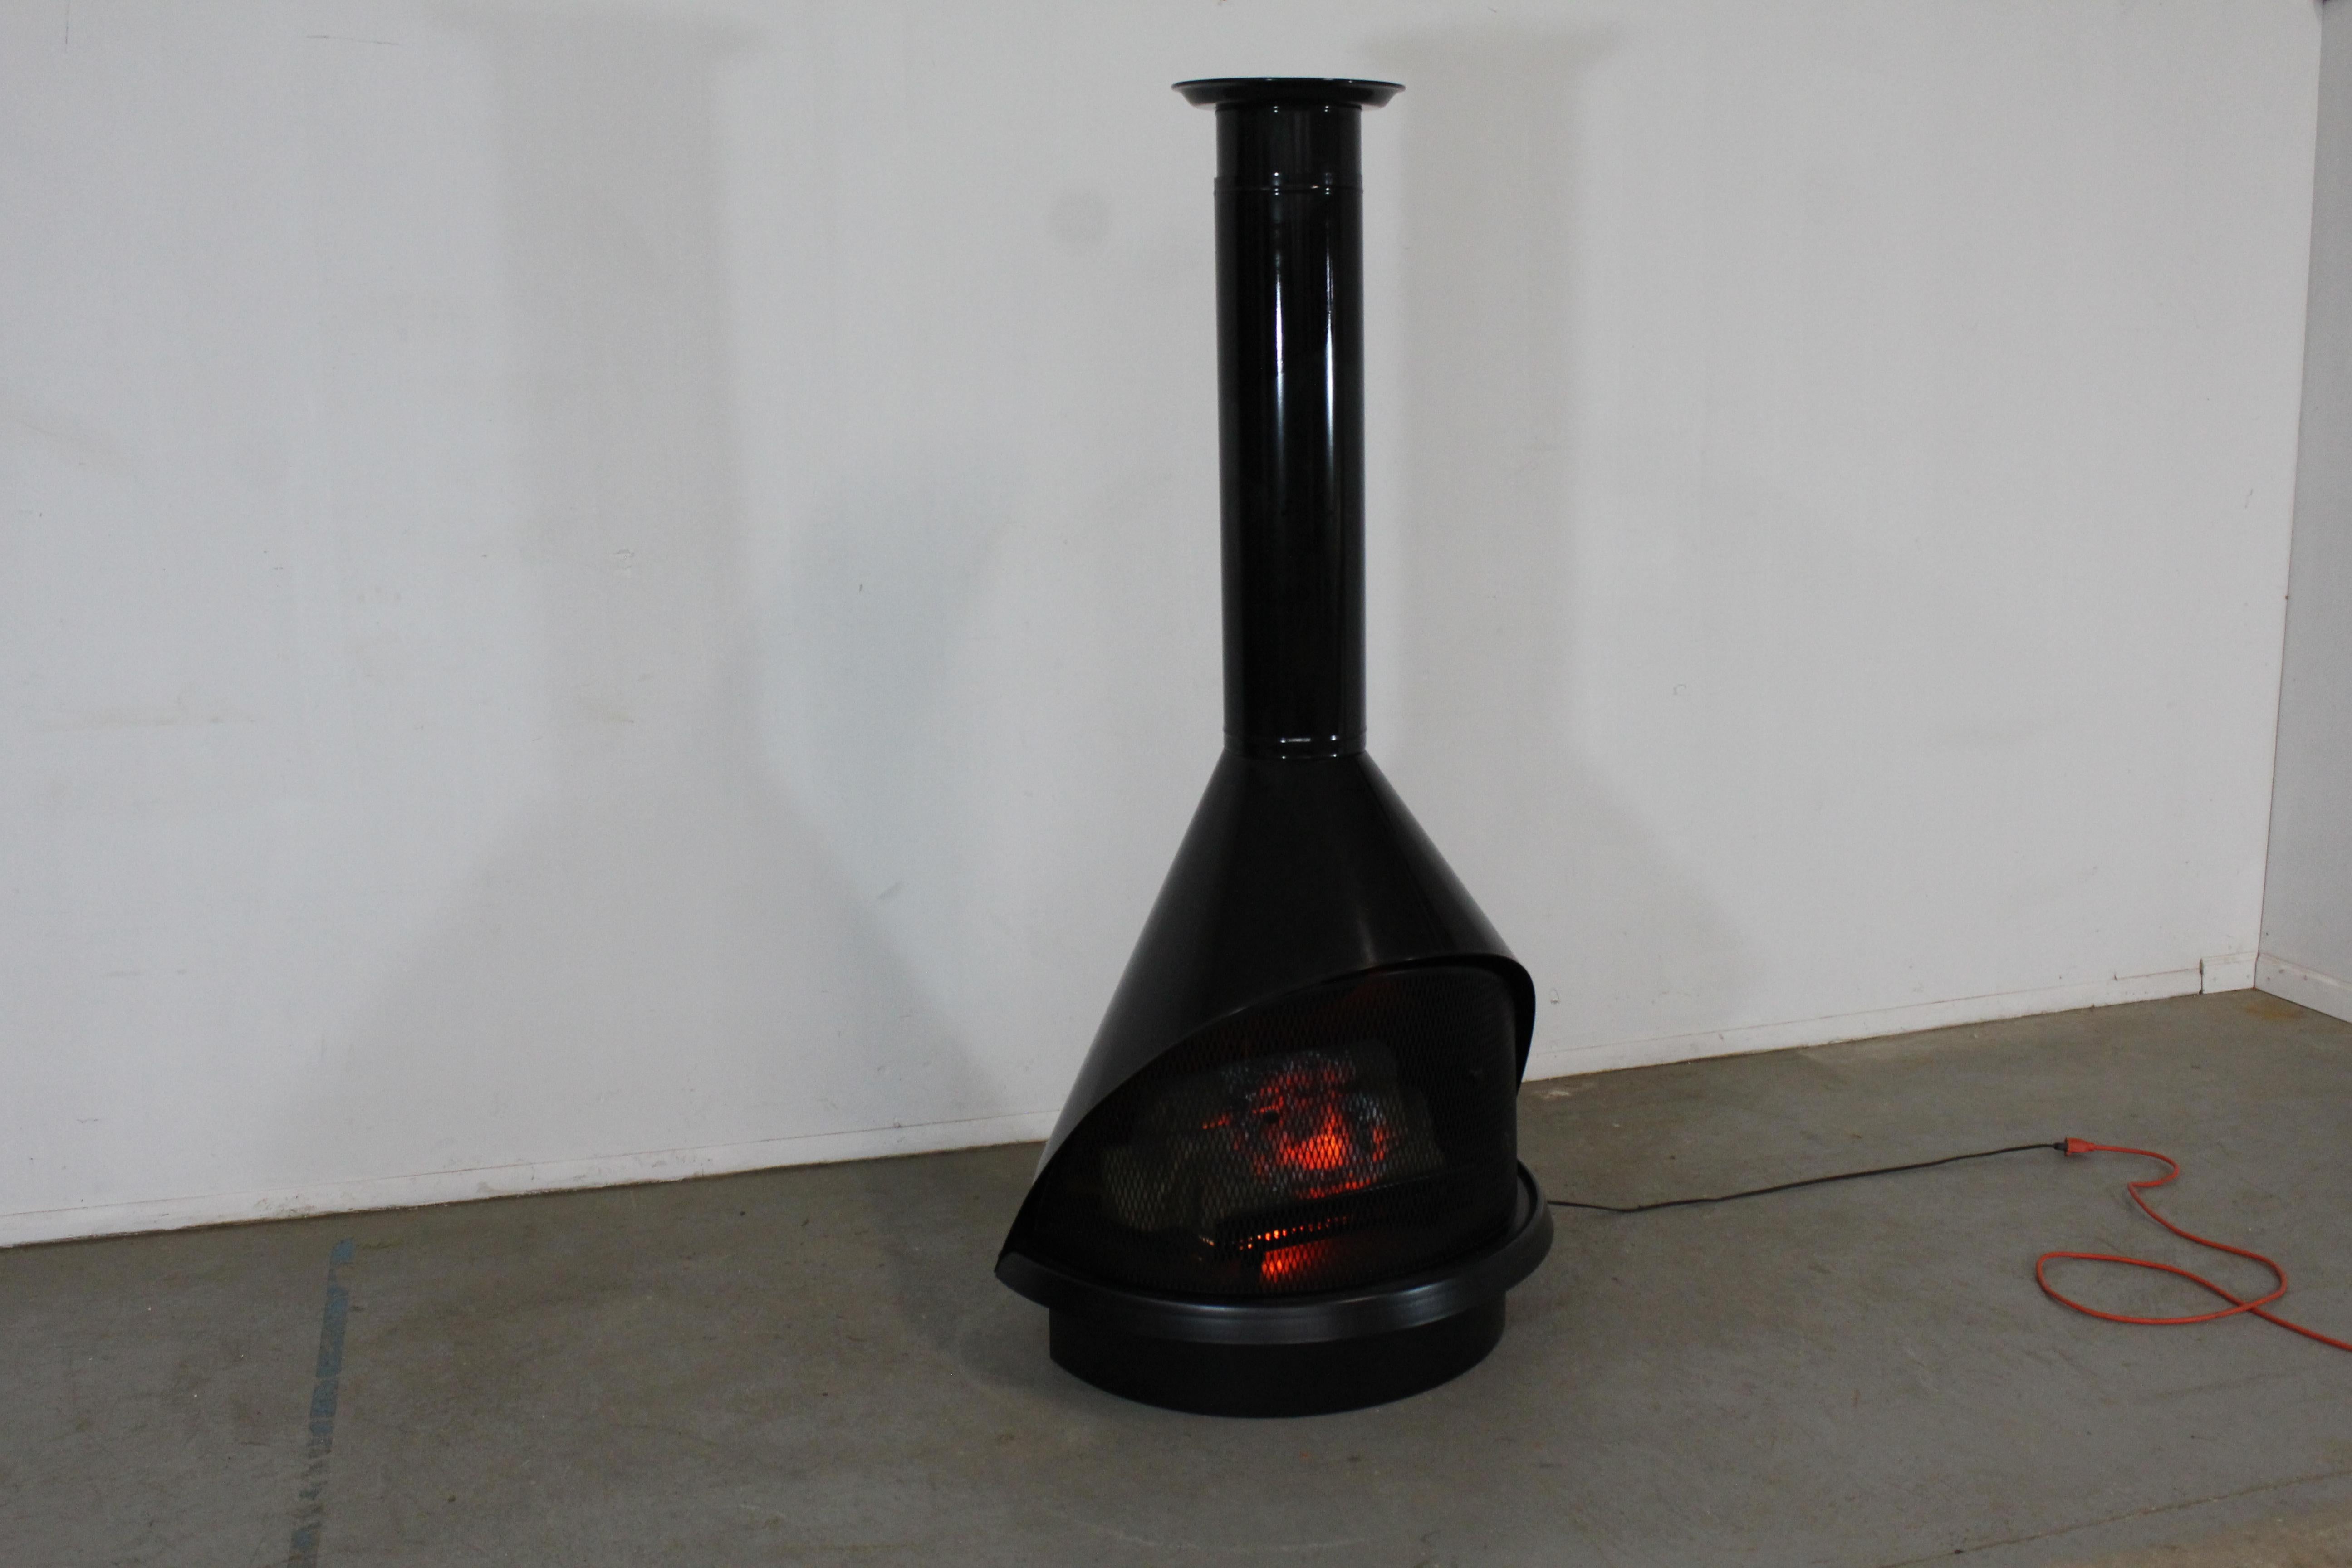 Vintage Mid Century Modern Electric Preway Conical Style Fireplace Jet Black

Offered is an architectural treat a Vintage Mid Century Modern Conical Fireplace. Features 1 piece of pipe as well as the ceiling collar. The fireplace has great lines and